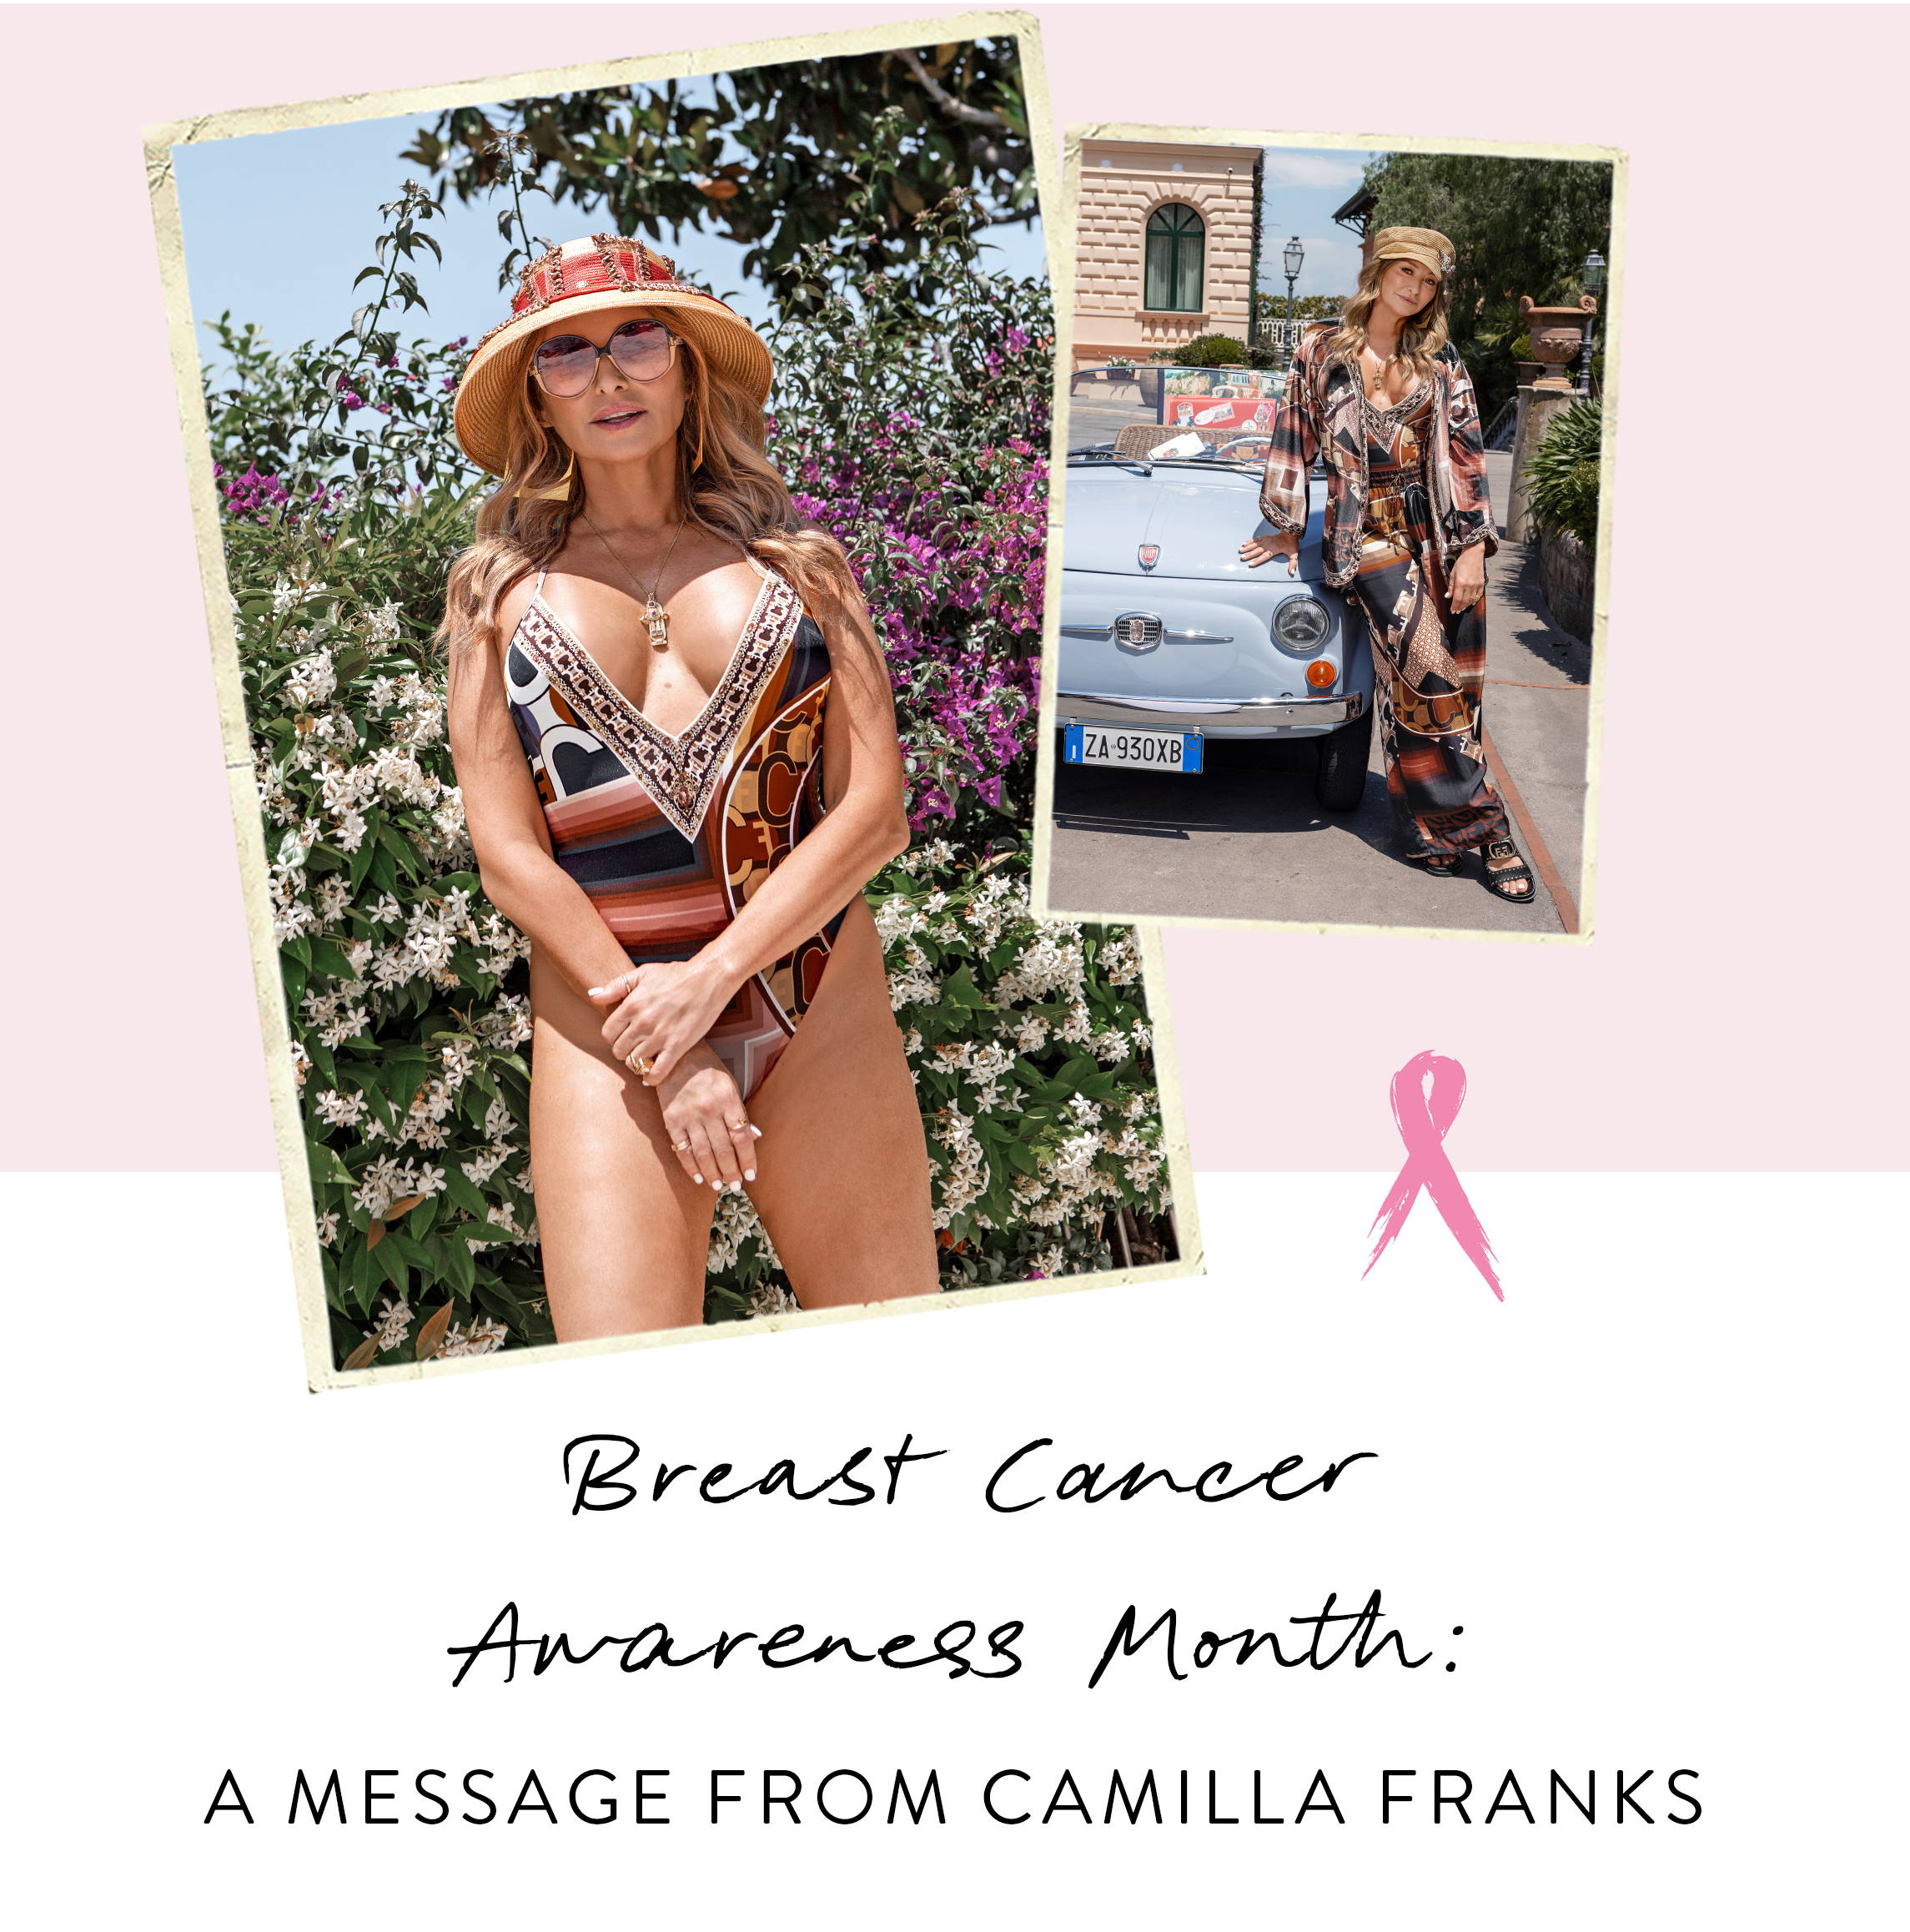 BREAST CANCER AWARENESS MONTH: A MESSAGE FROM CAMILLA FRANKS